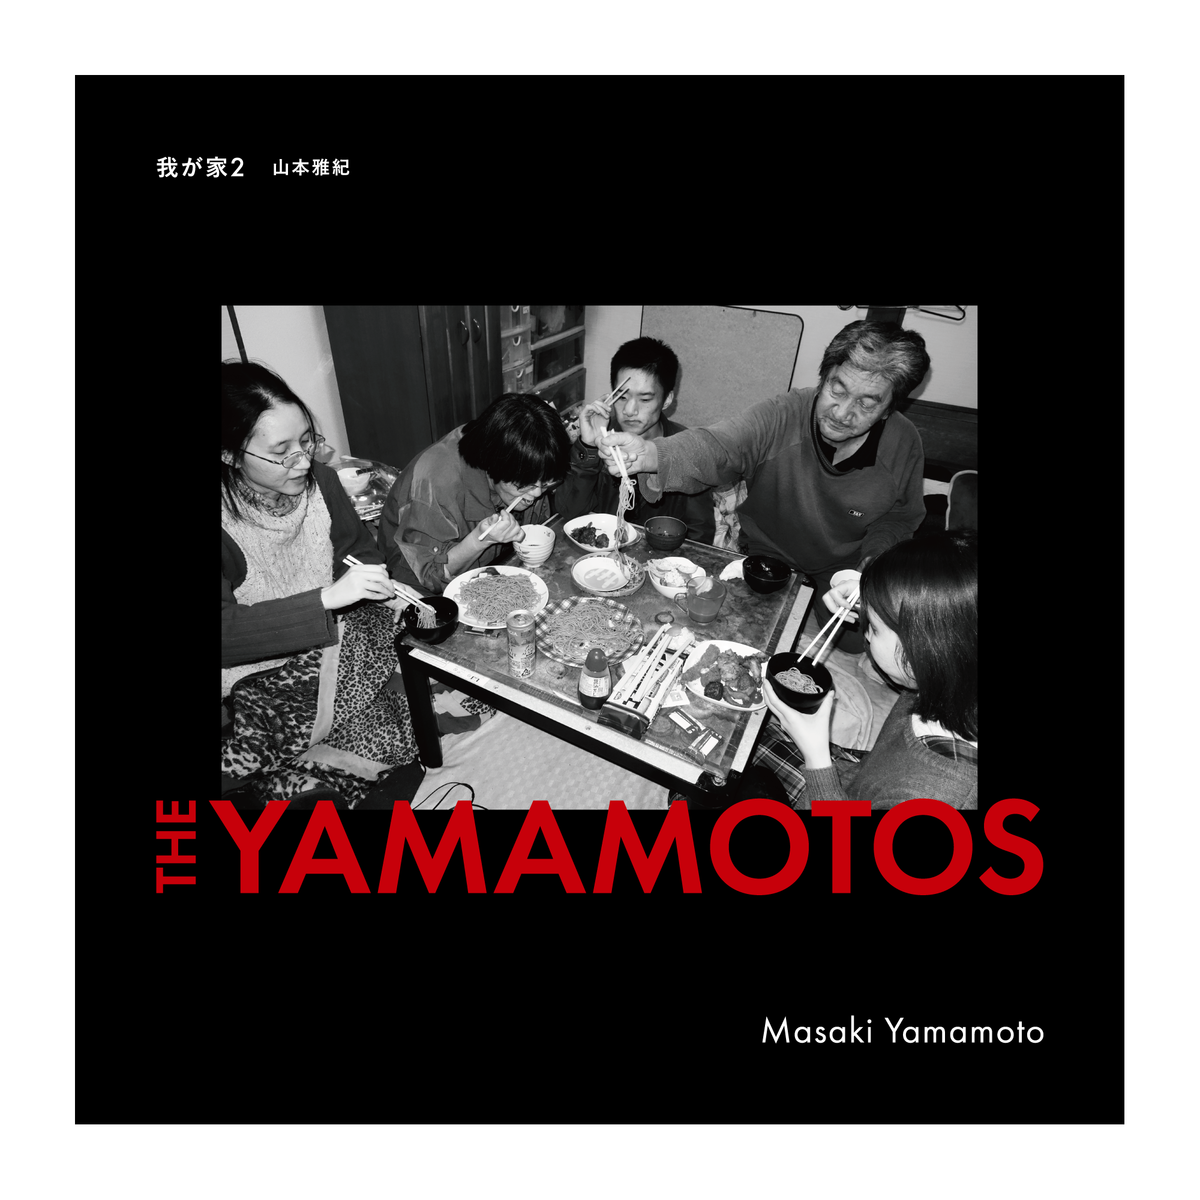 "The Yamamotos," published by Zen Foto 